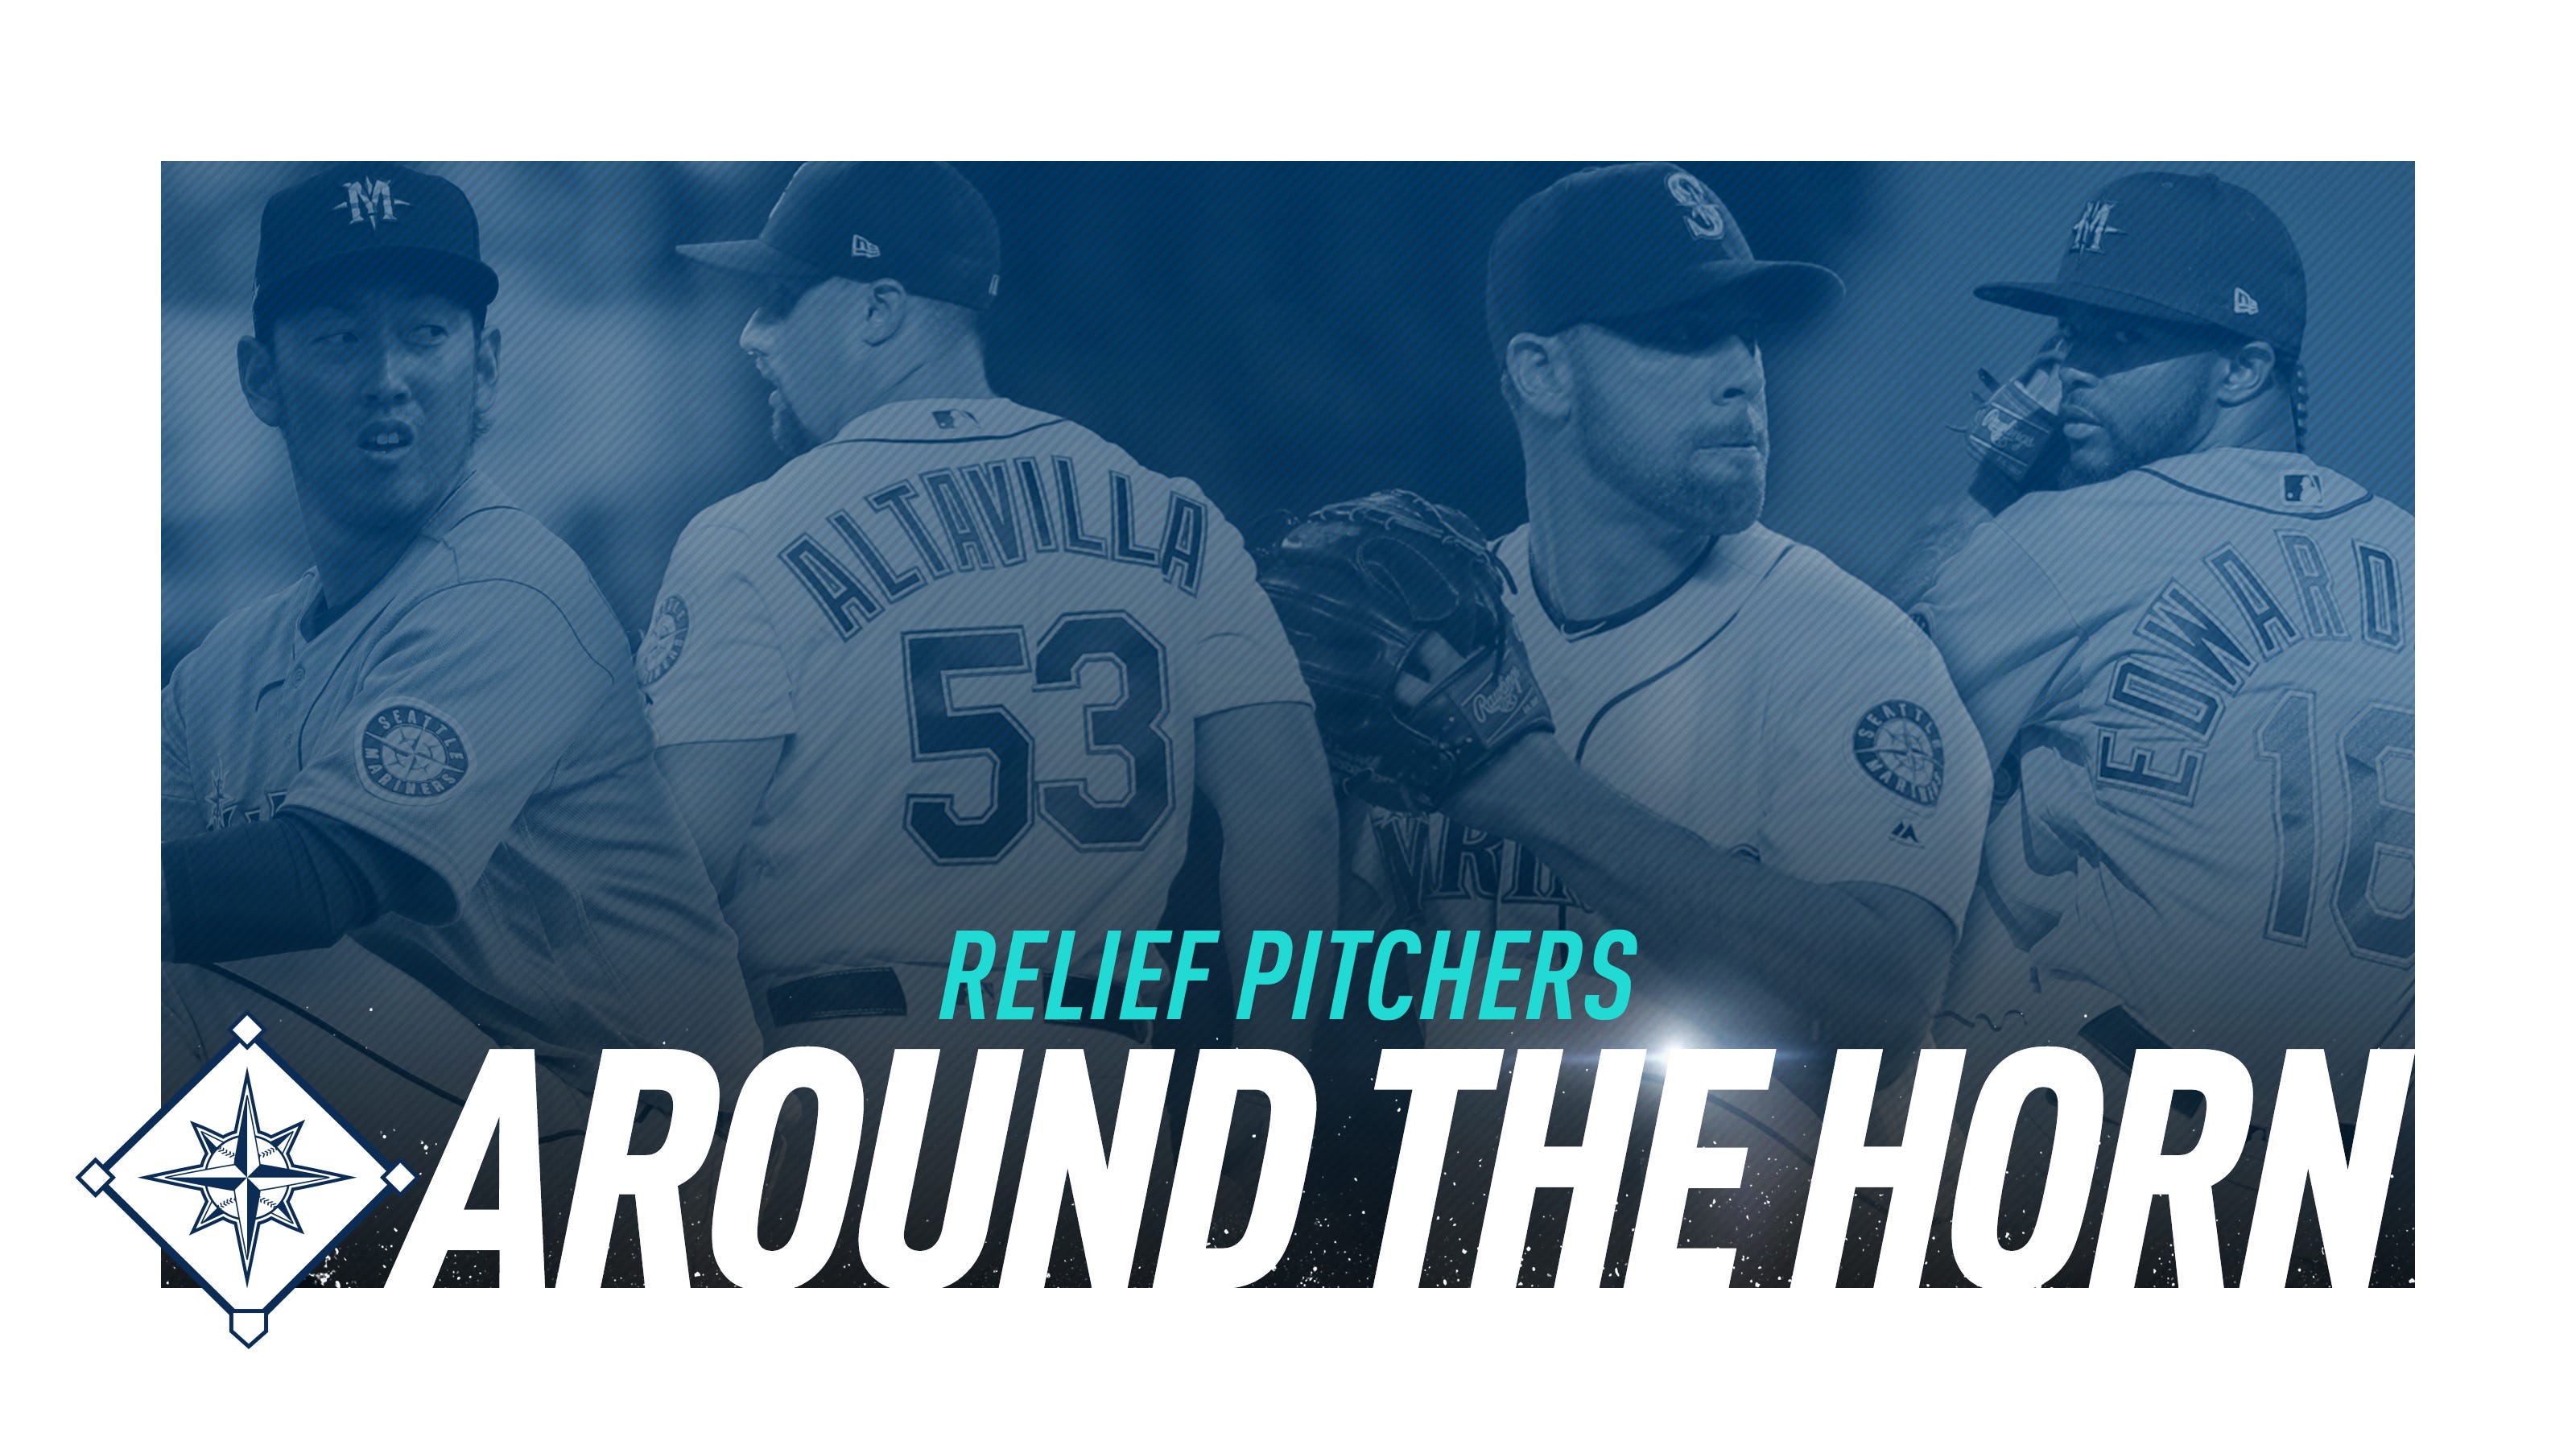 Mariners History: A Look at the Relievers of the Early Years